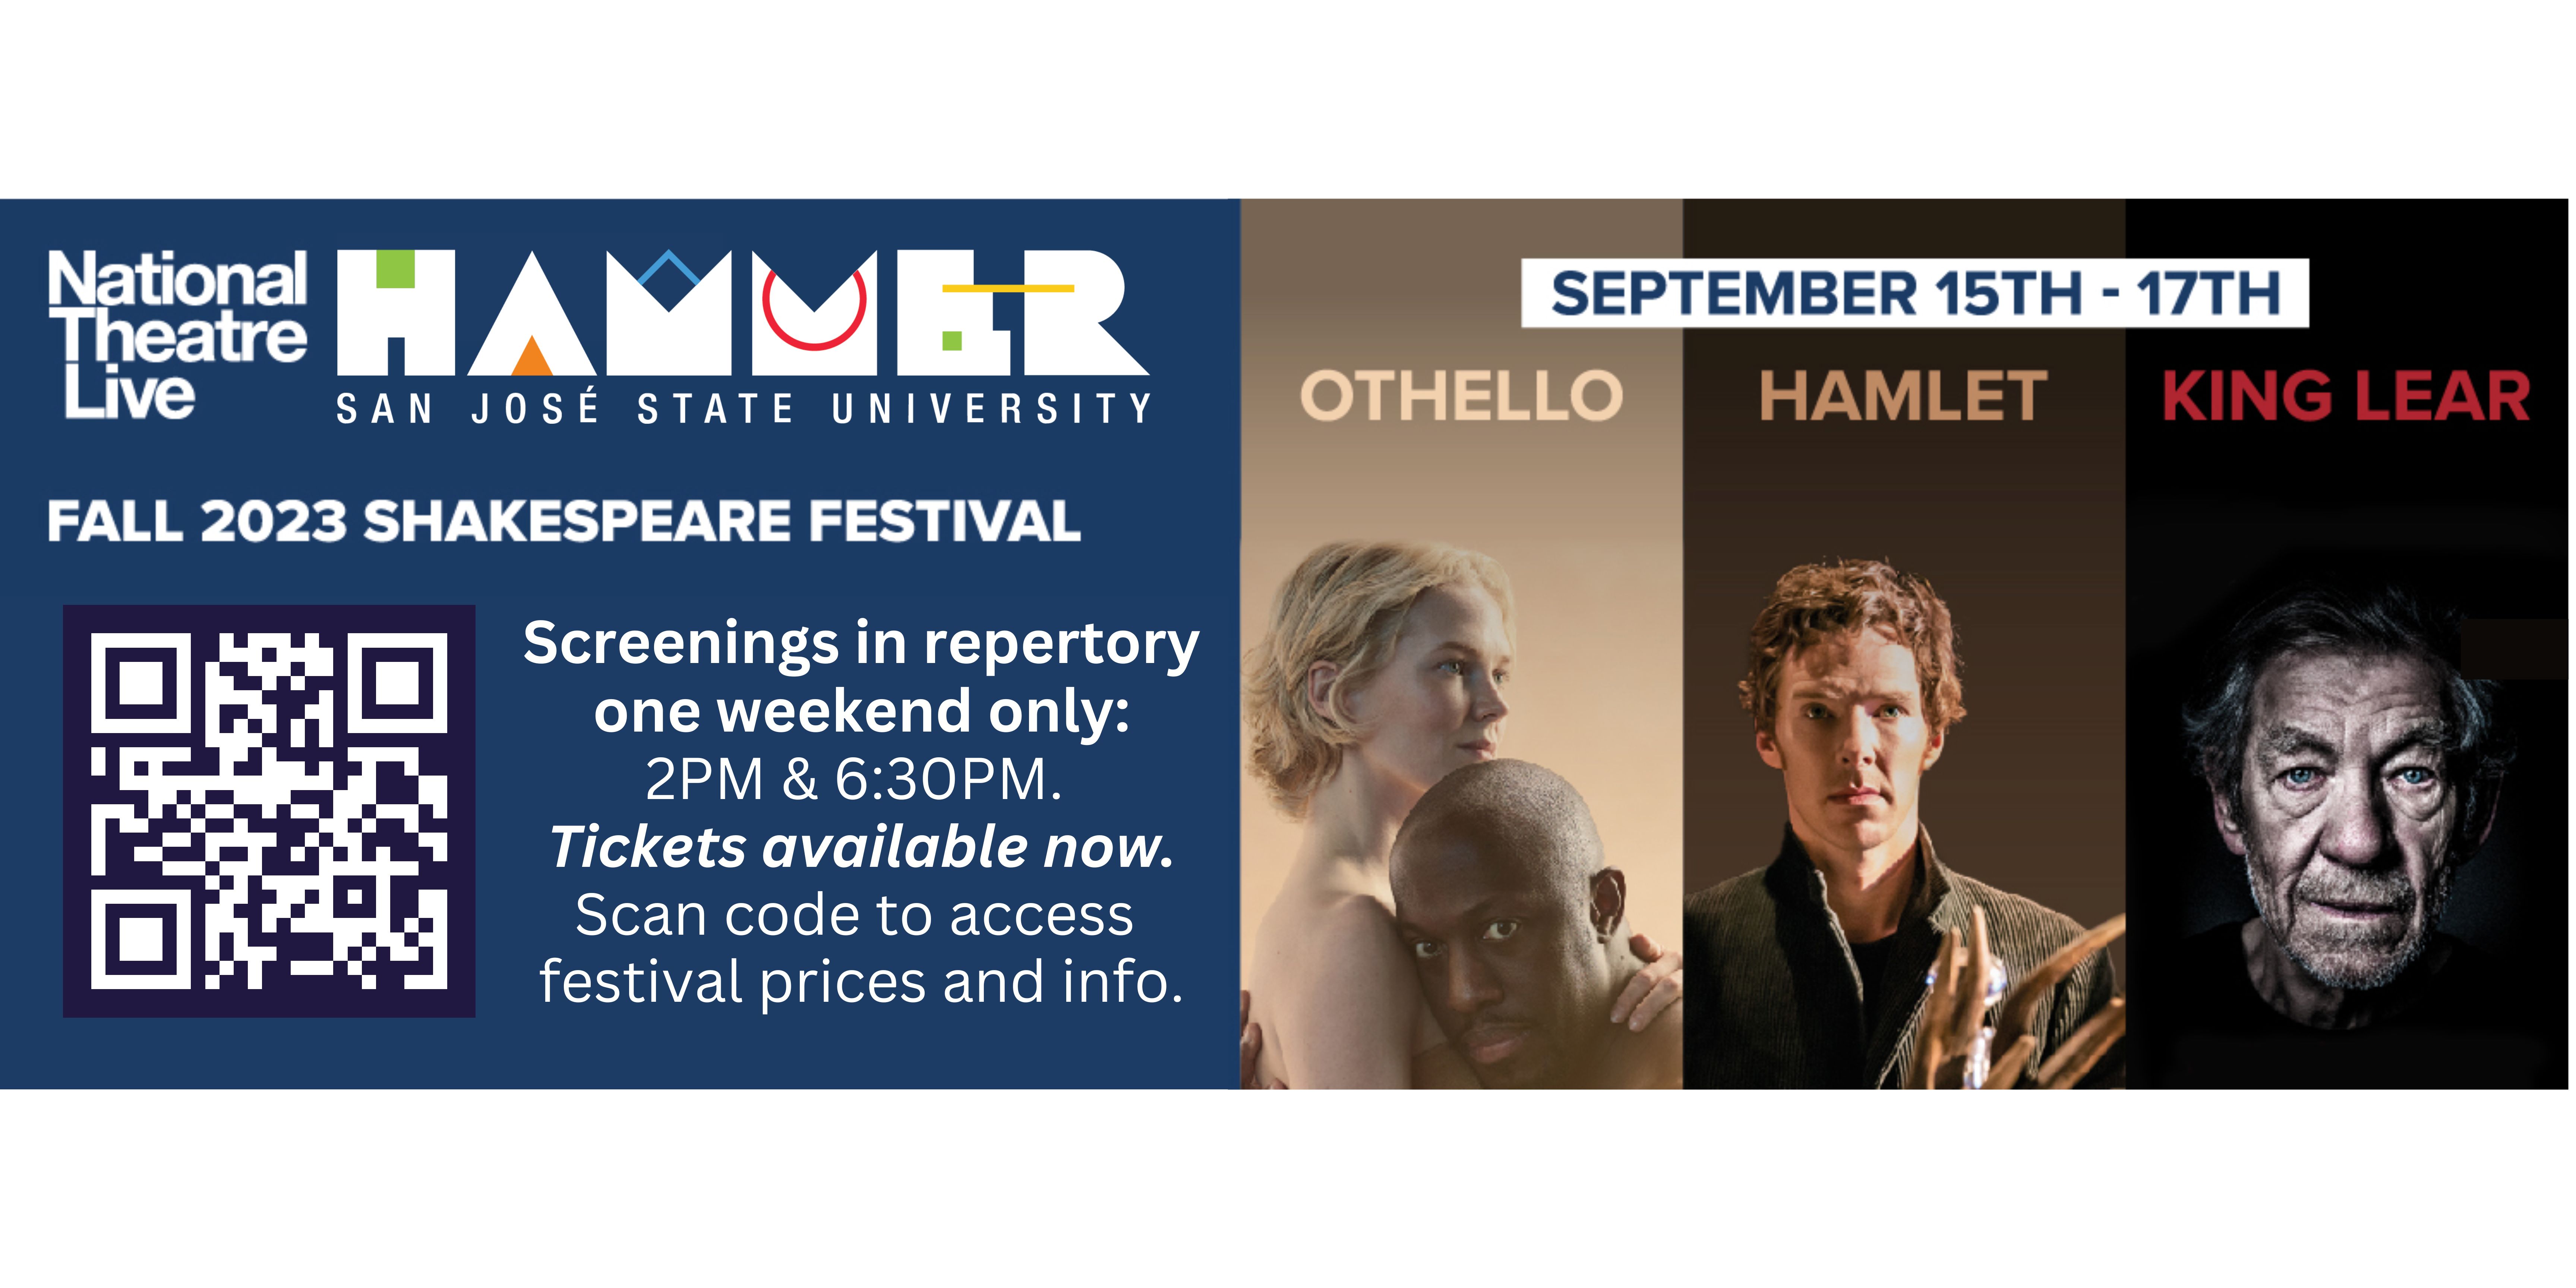 Hammer Theatre Center Presents Fall 2023 Shakespeare Festival Featuring National Theatre Live Screenings of Shakespeare's Othello, Hamlet and King Lear